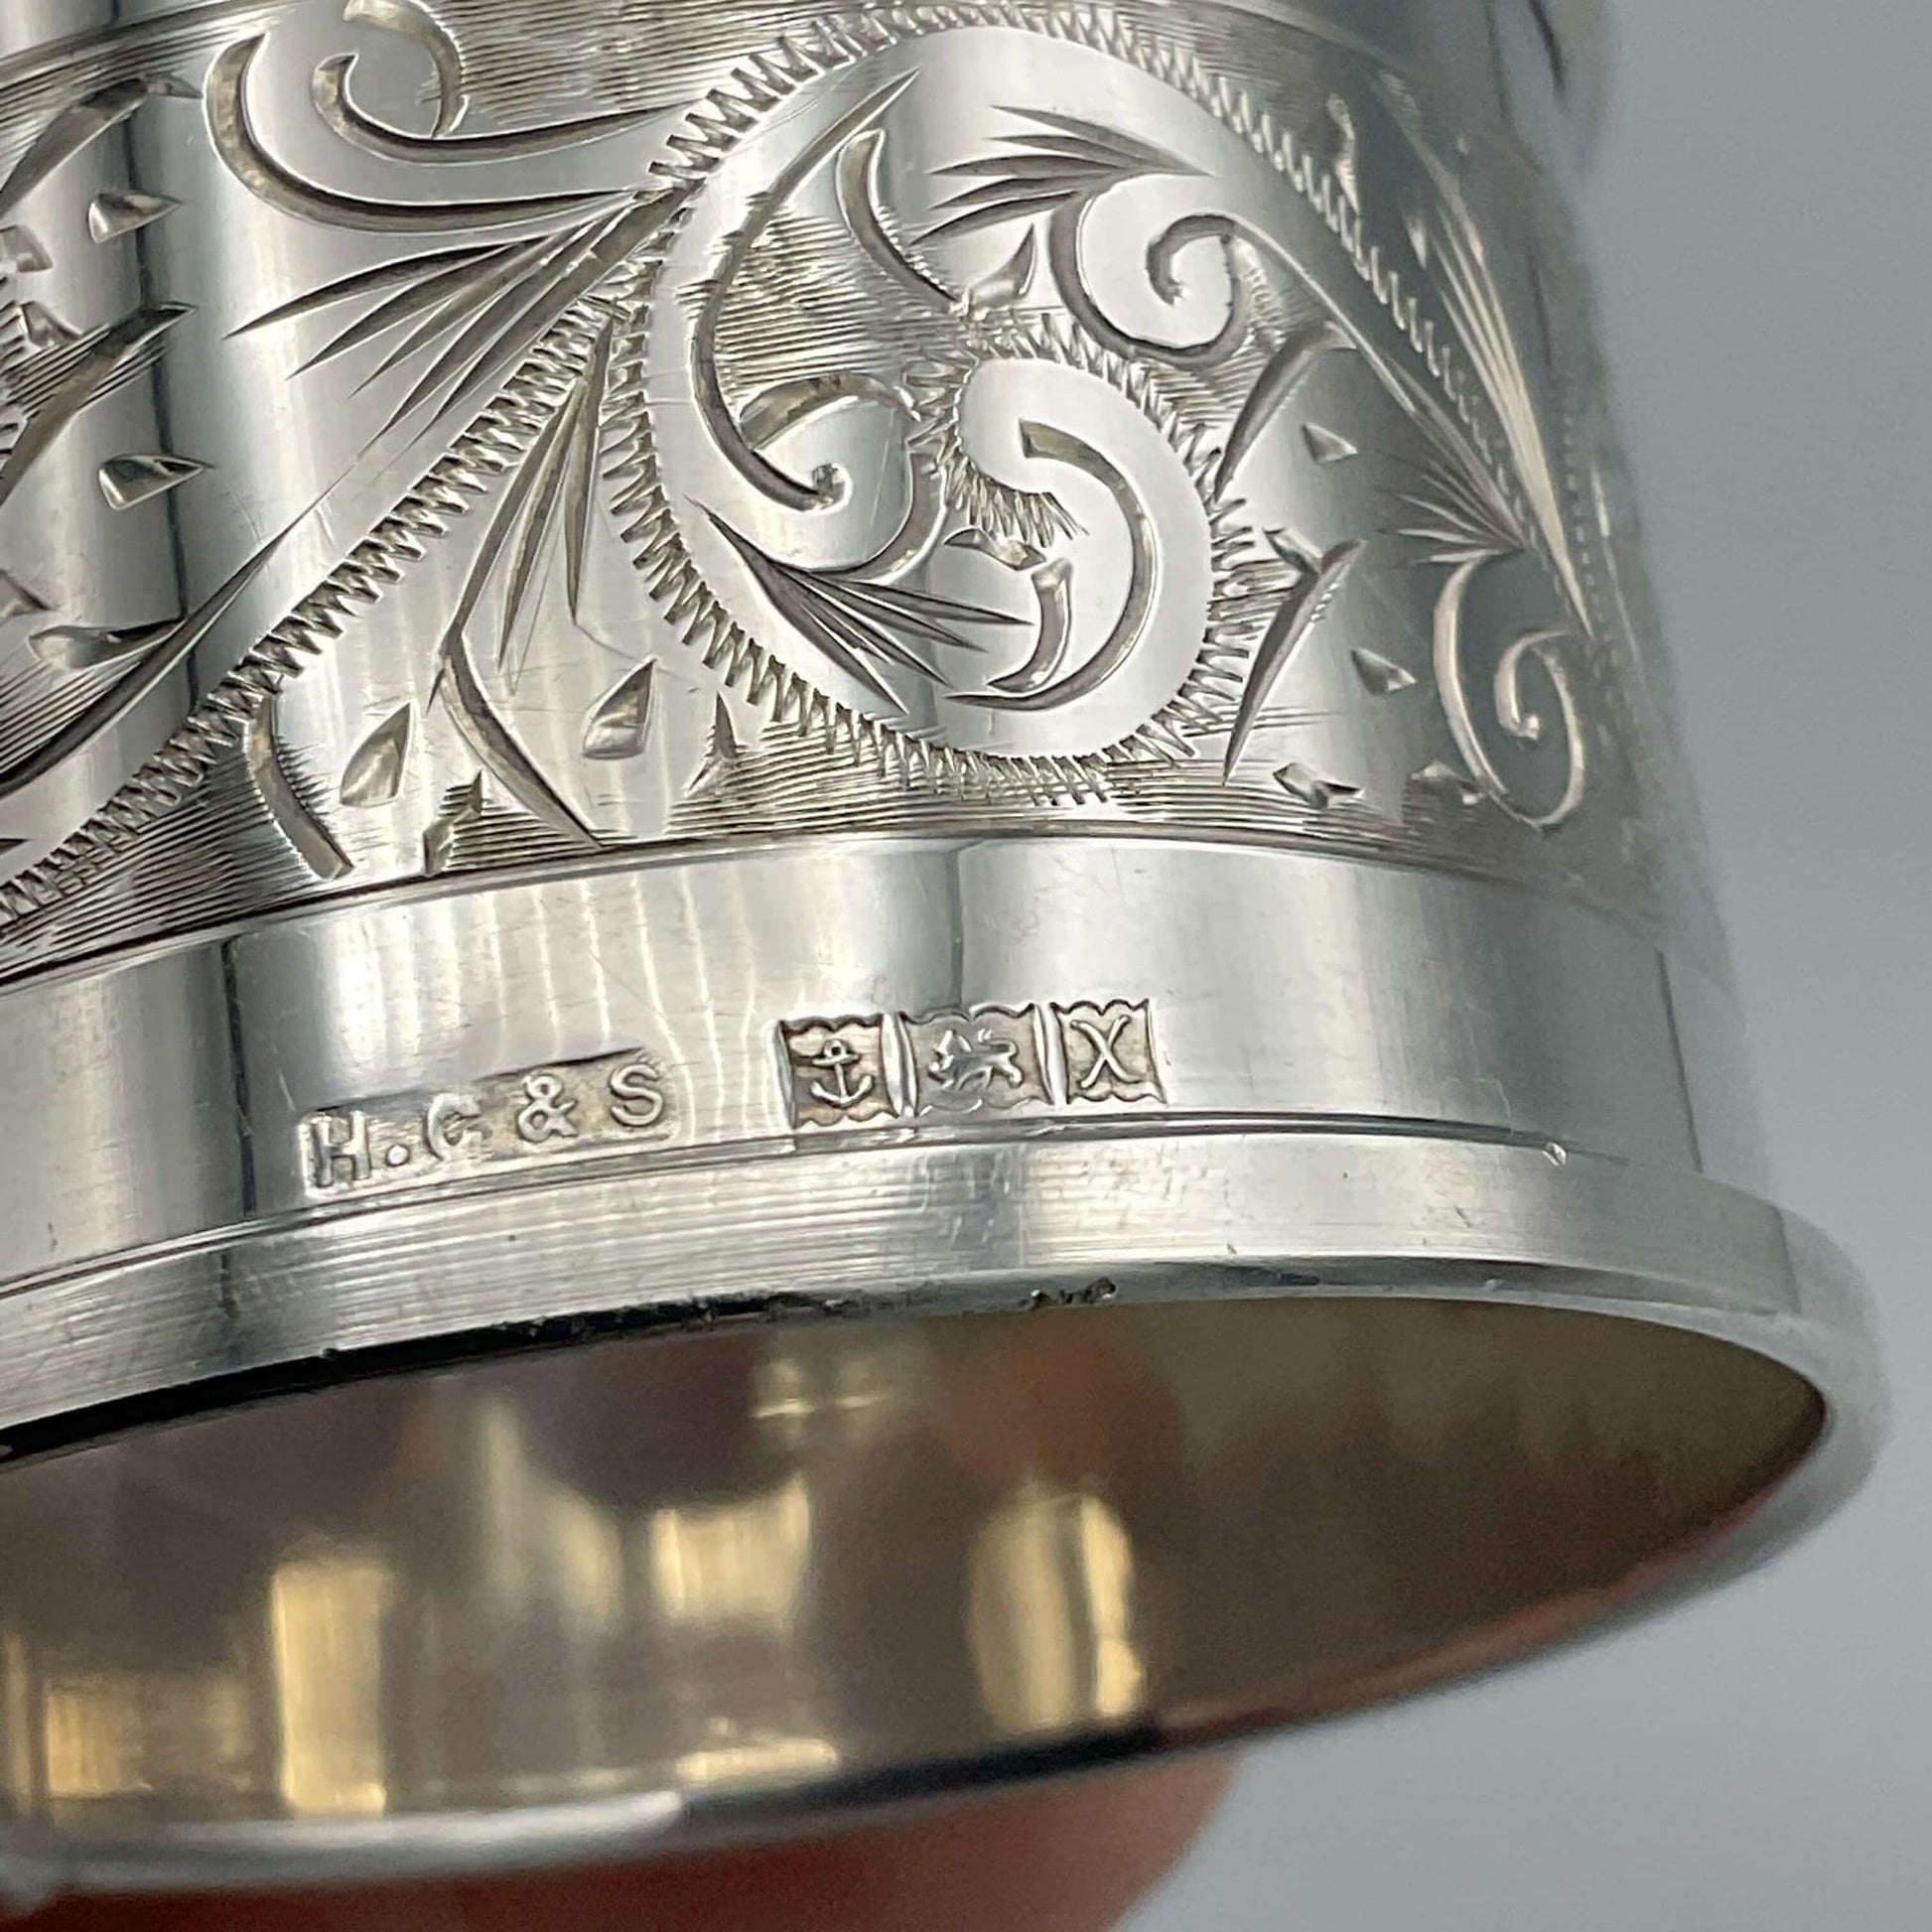 Silver hallmarks on napkin ring showing the maker's marks and Birmingham hallmark letters.